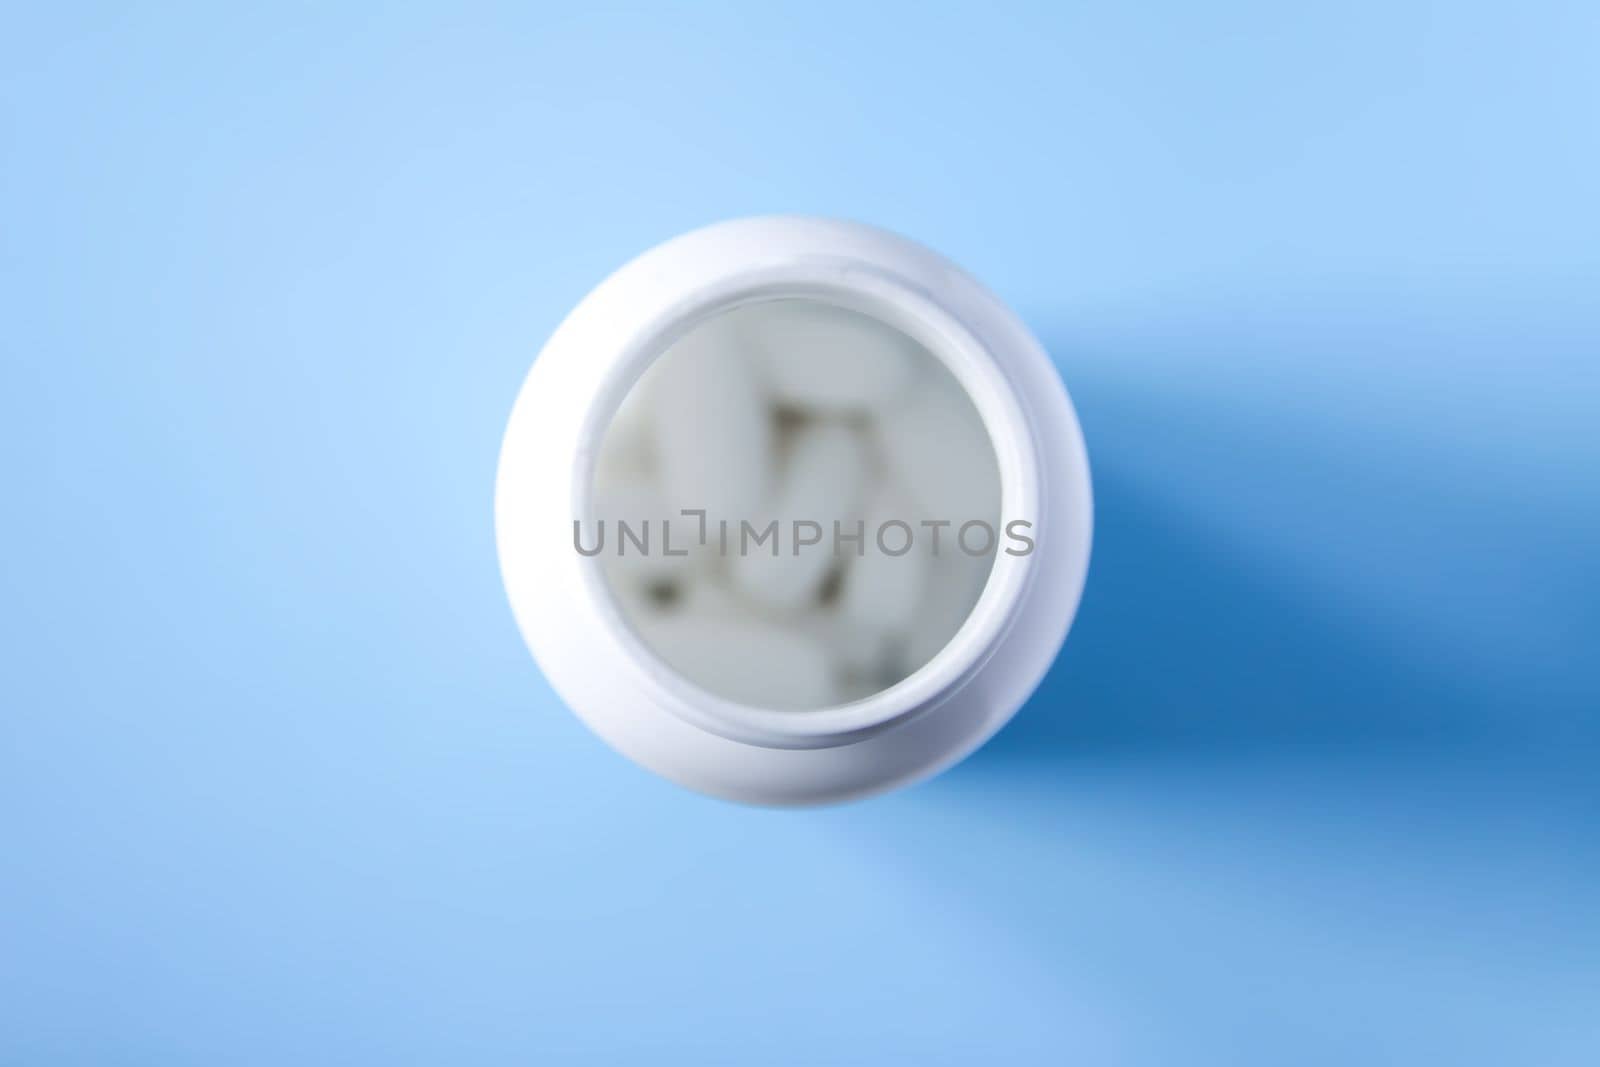 Pills of vitamin in the opened white plastic container on soft blue background. by nightlyviolet